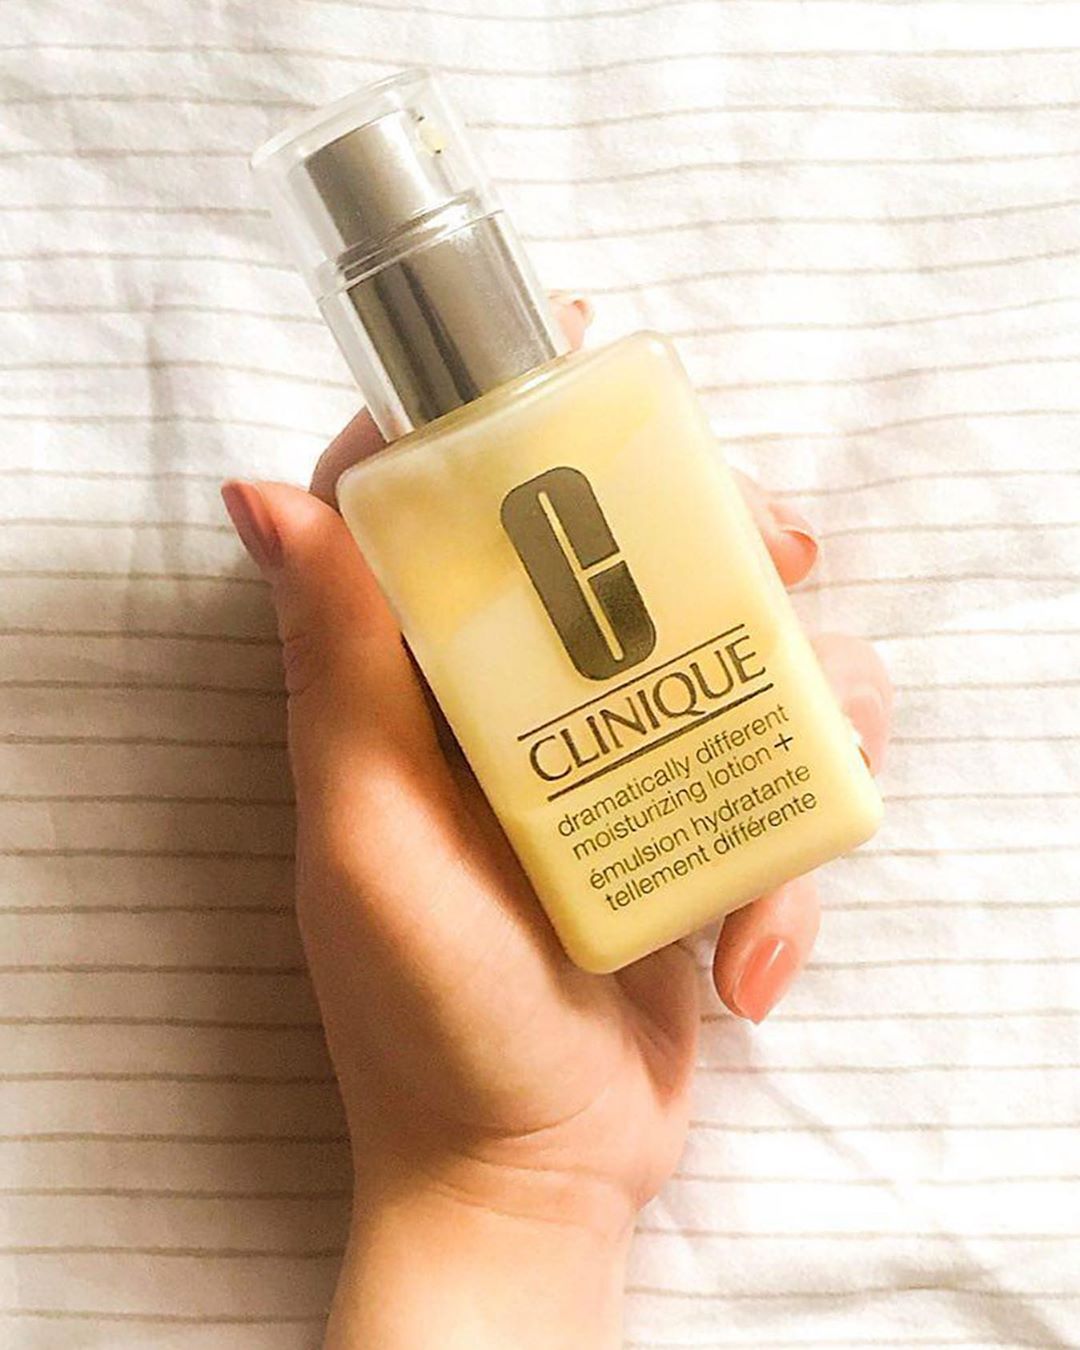 Clinique - "I have used this for years and years (my mom loves it too!) and it has kept my face (and neck!) consistently hydrated without fail AND without my face turning shiny-greasy," says @mercuria...